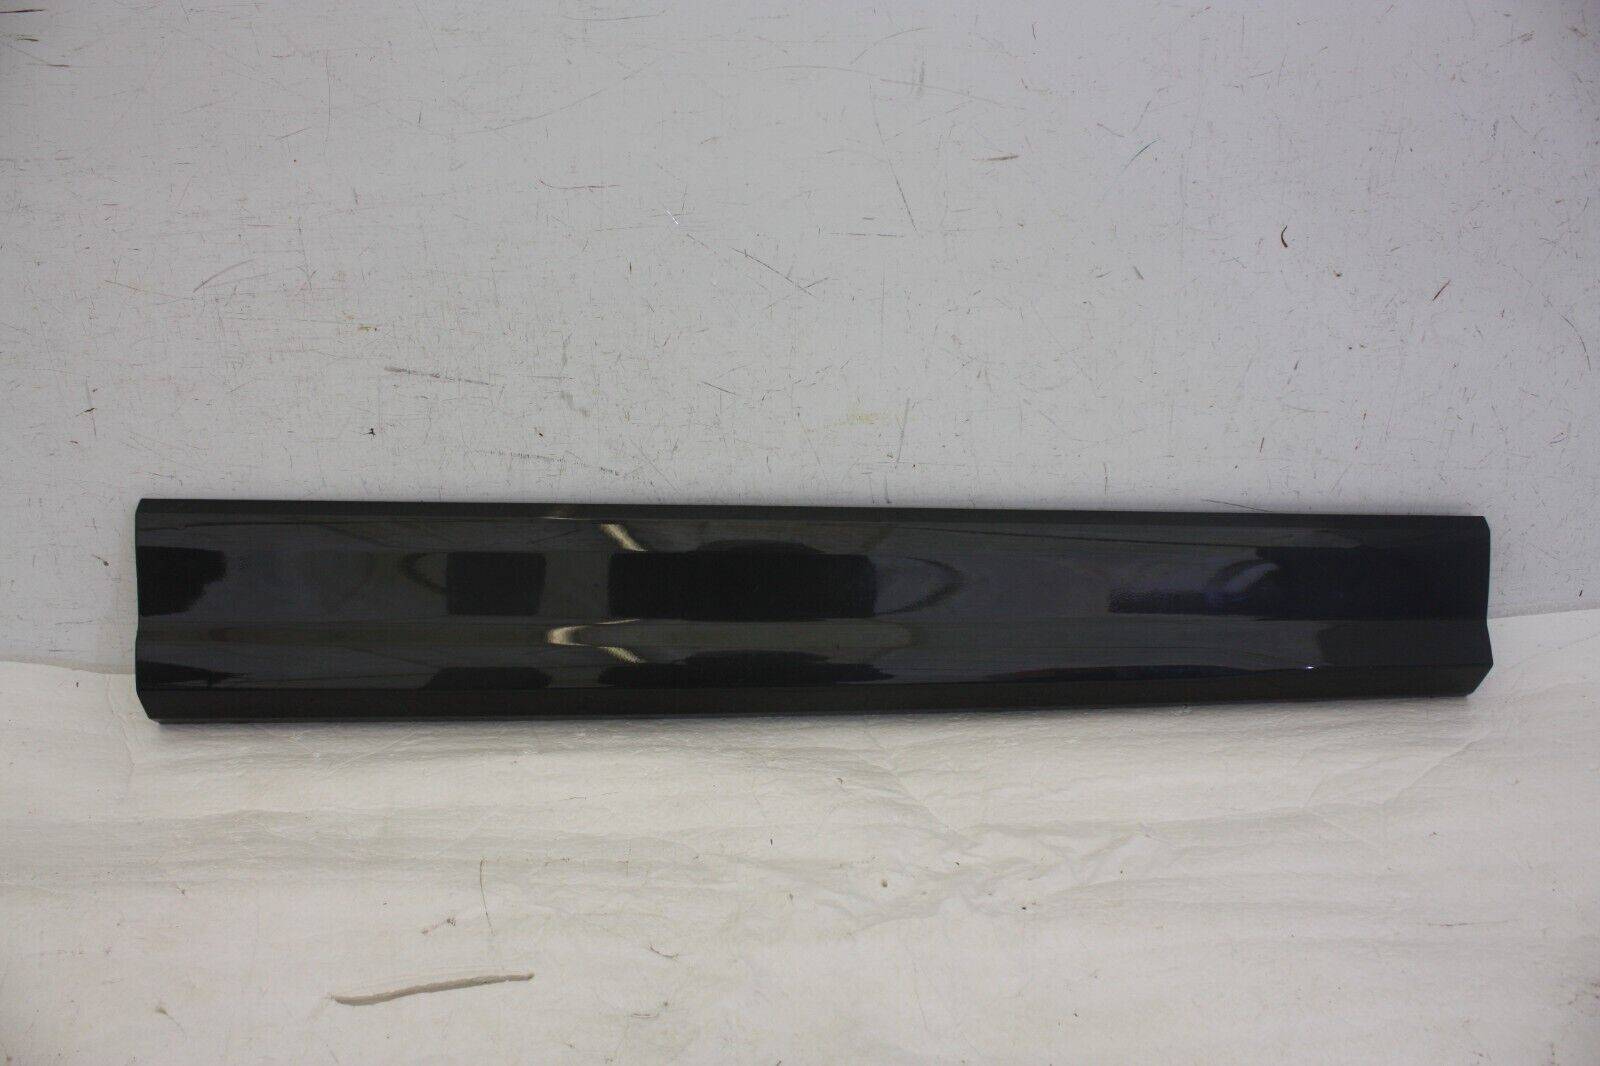 Audi Q2 Front Right Side Door Moulding 2016 TO 2021 81A853960B Genuine 176283532684